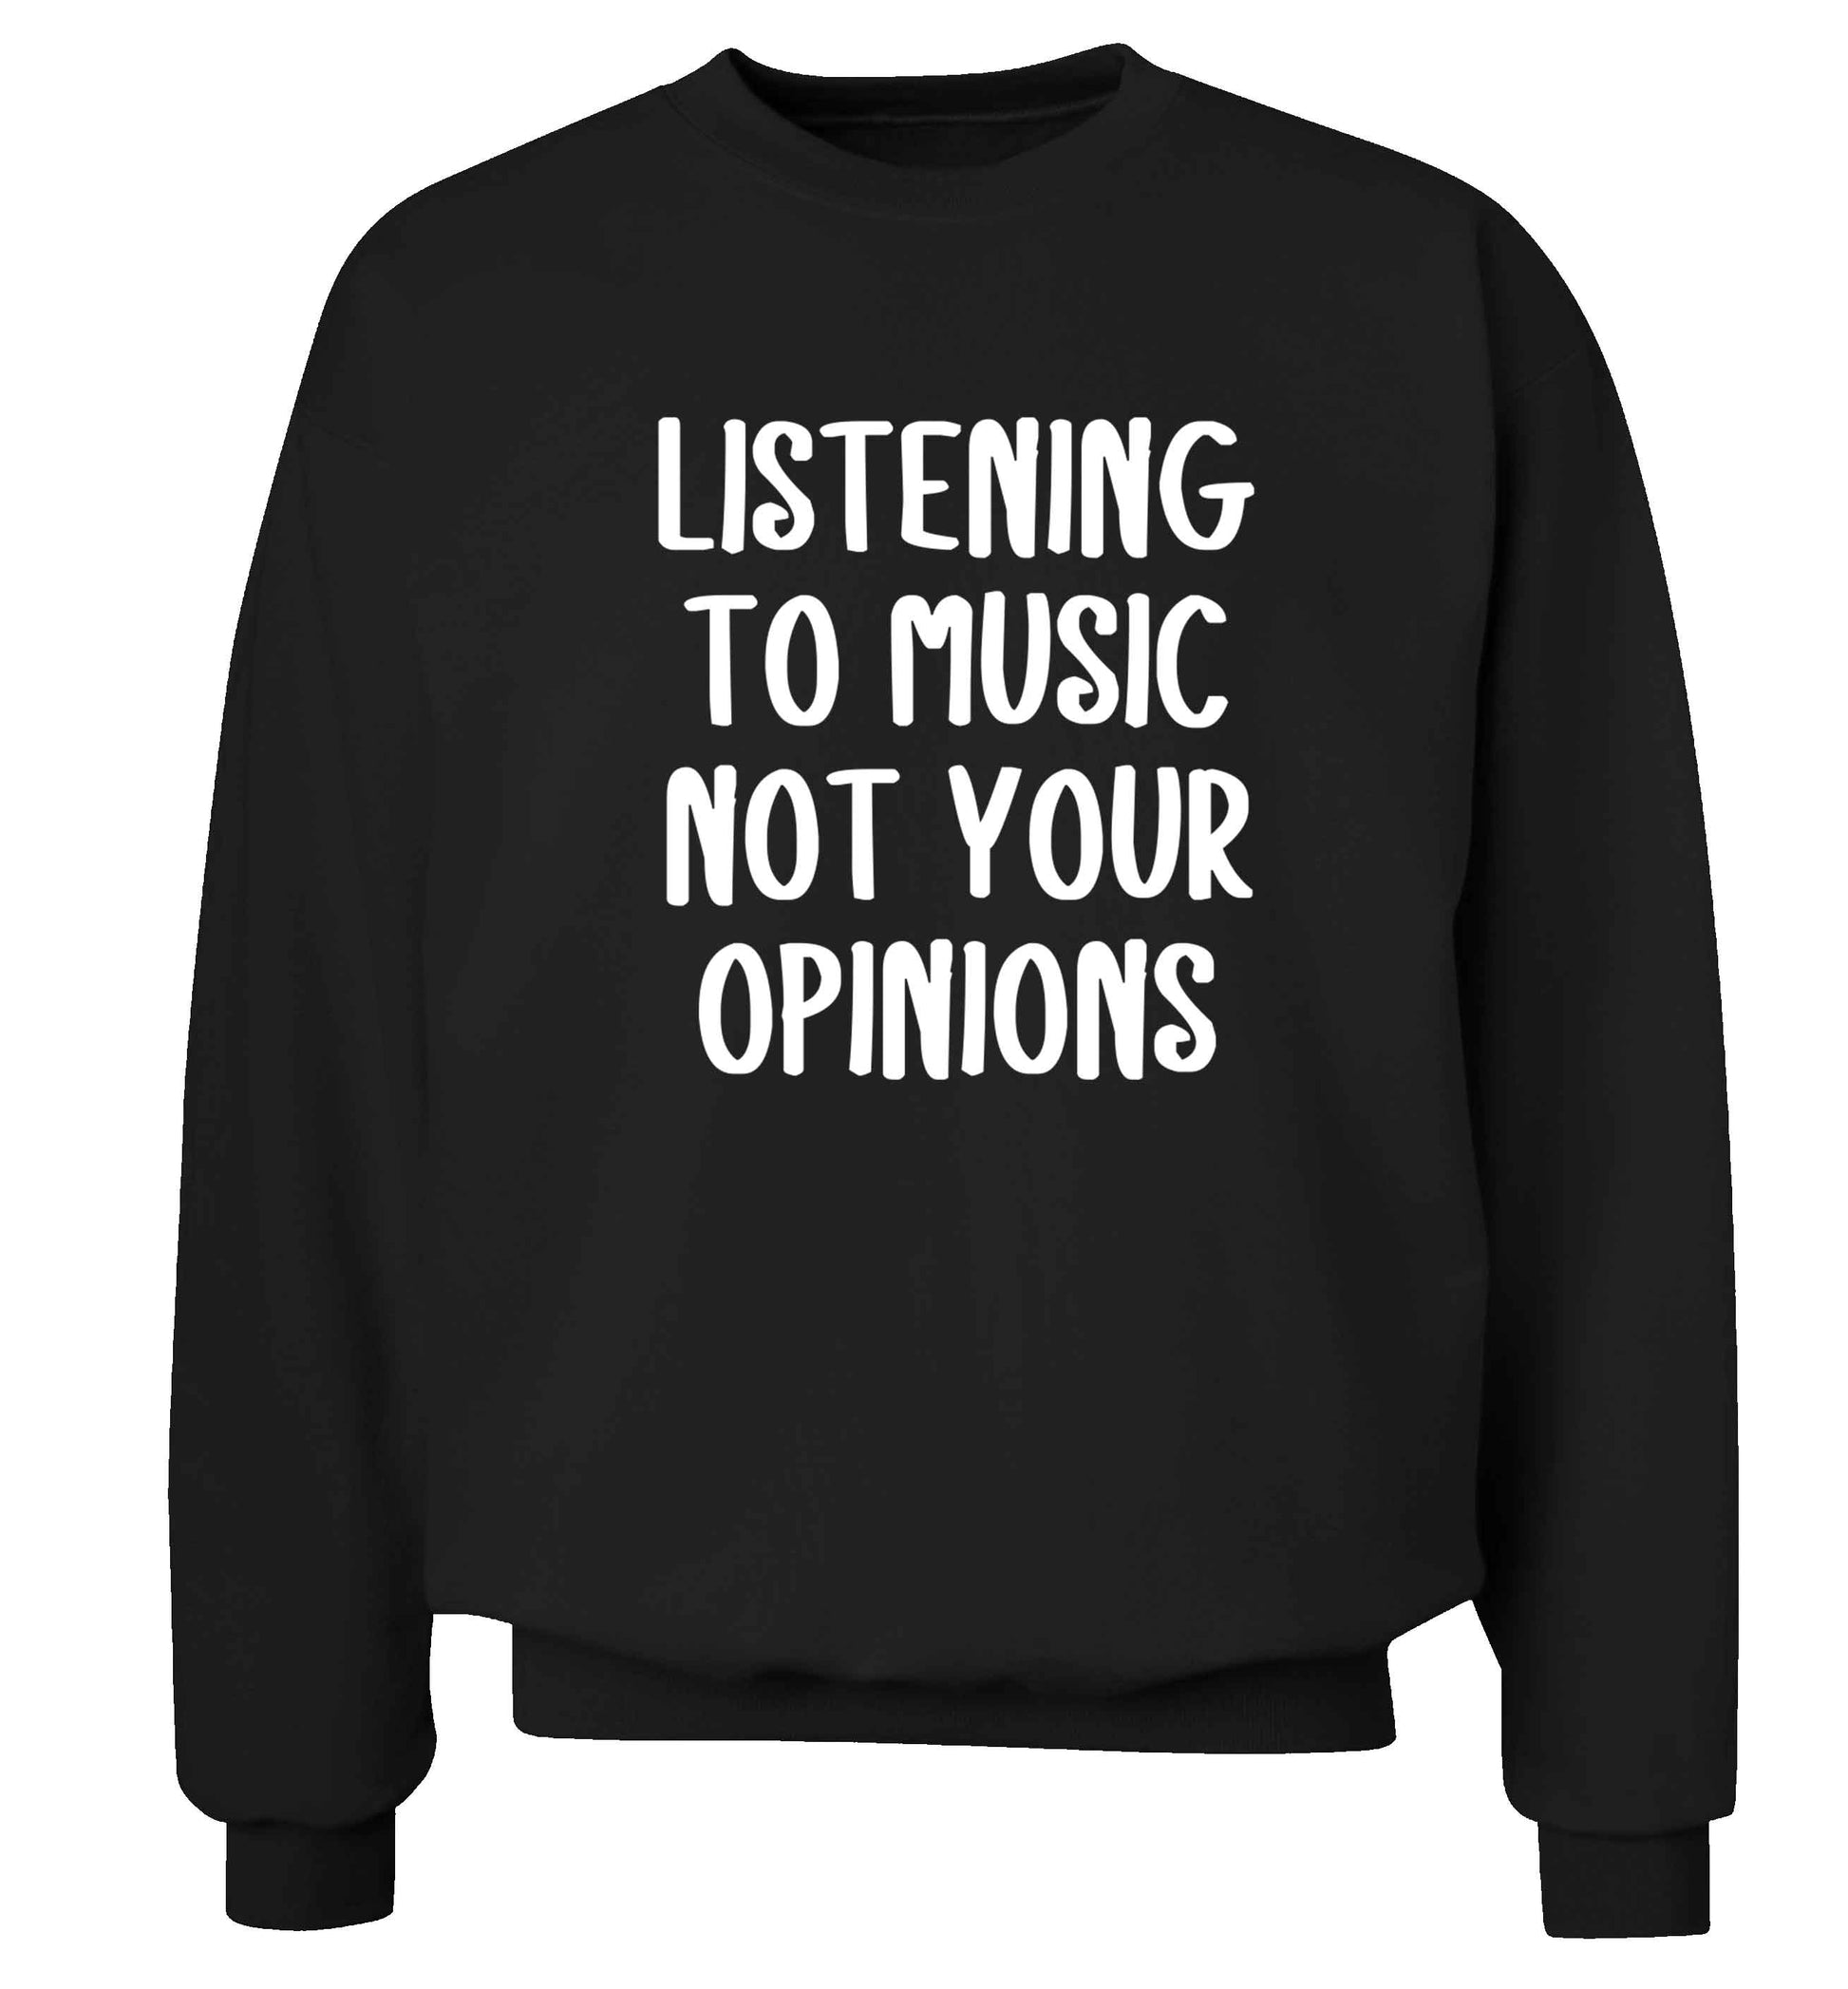 Listening to music not your opinions adult's unisex black sweater 2XL